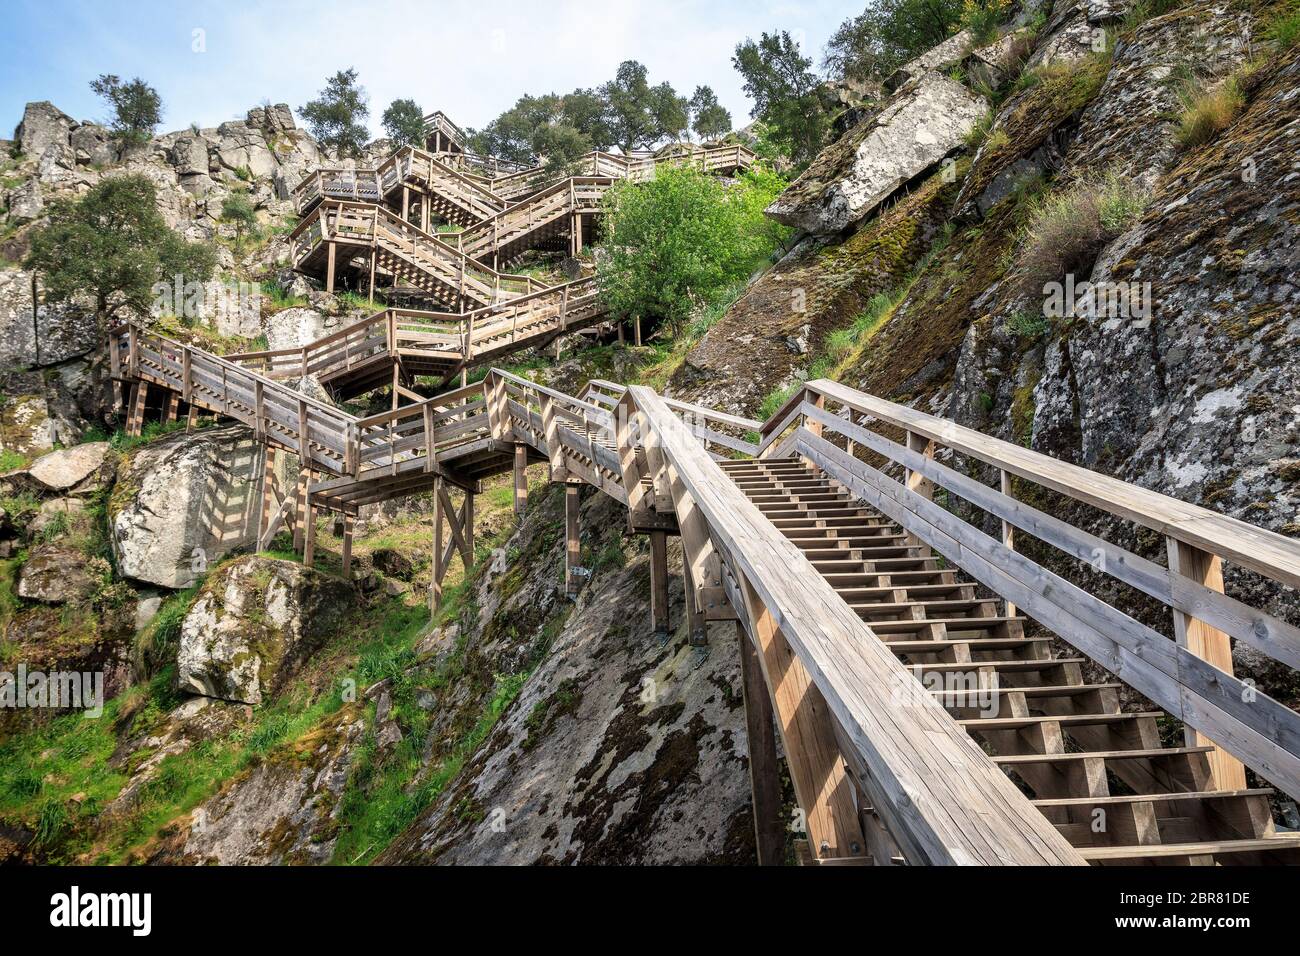 Arouca, Portugal - April 28, 2019: Staircase of the Paiva Walkways meandering through the rocky slope, near Arouca in Portugal. Stock Photo